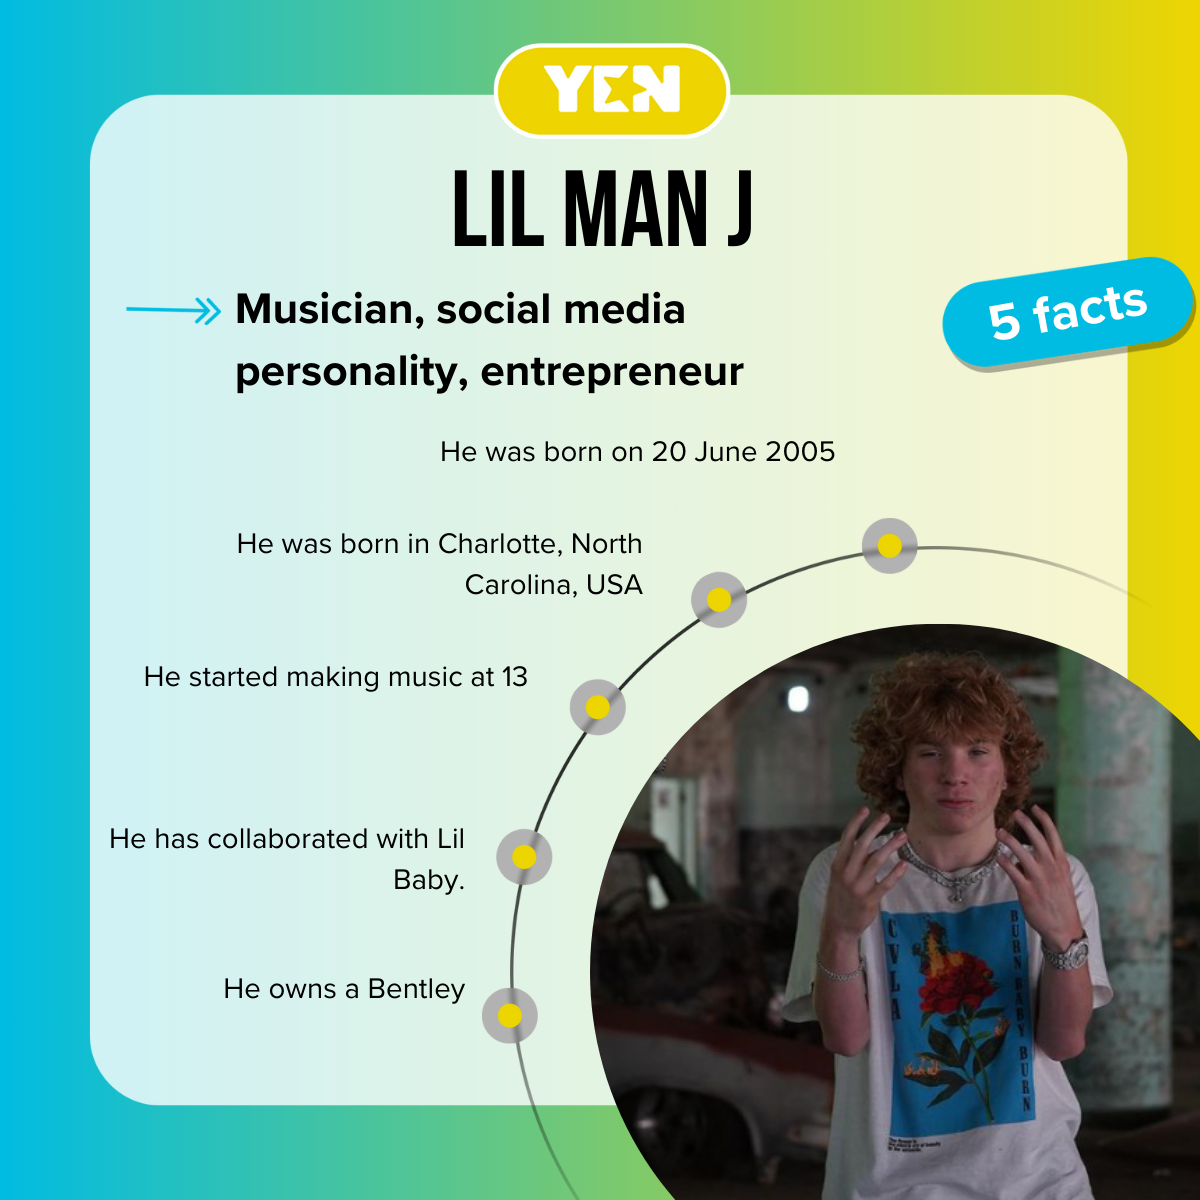 Facts about Lil Man J